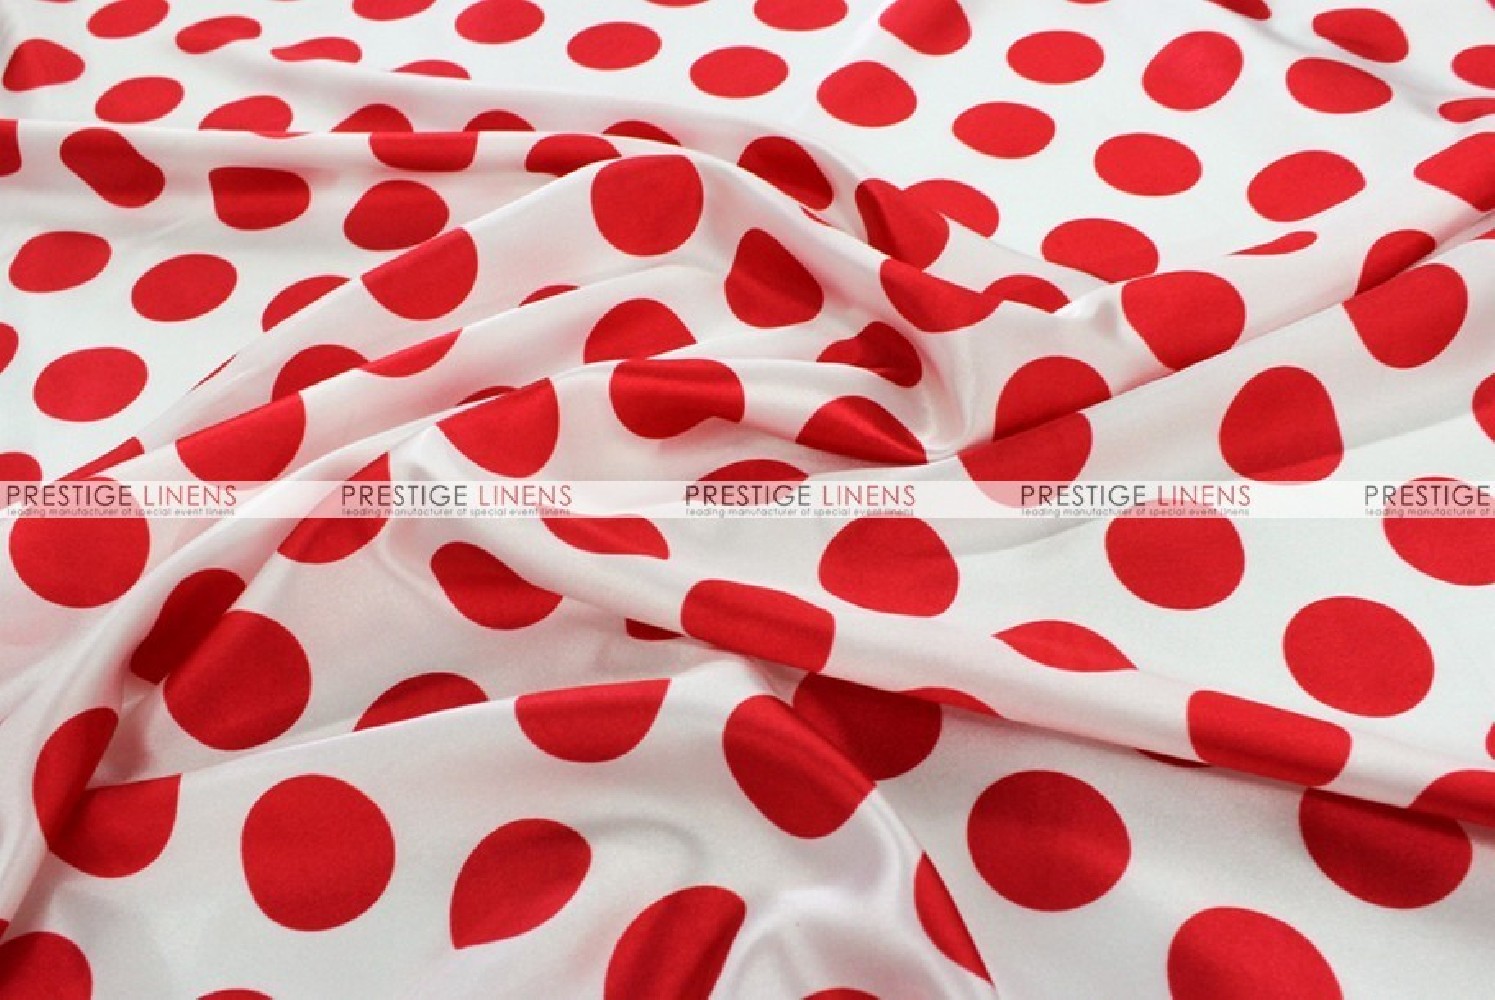 White on Red 1/2 Inch Silky Polka Dot Satin Fabric By The Yard 60’’ Wide Silk Charmeuse Satin Fabric with Polka White Dots Print